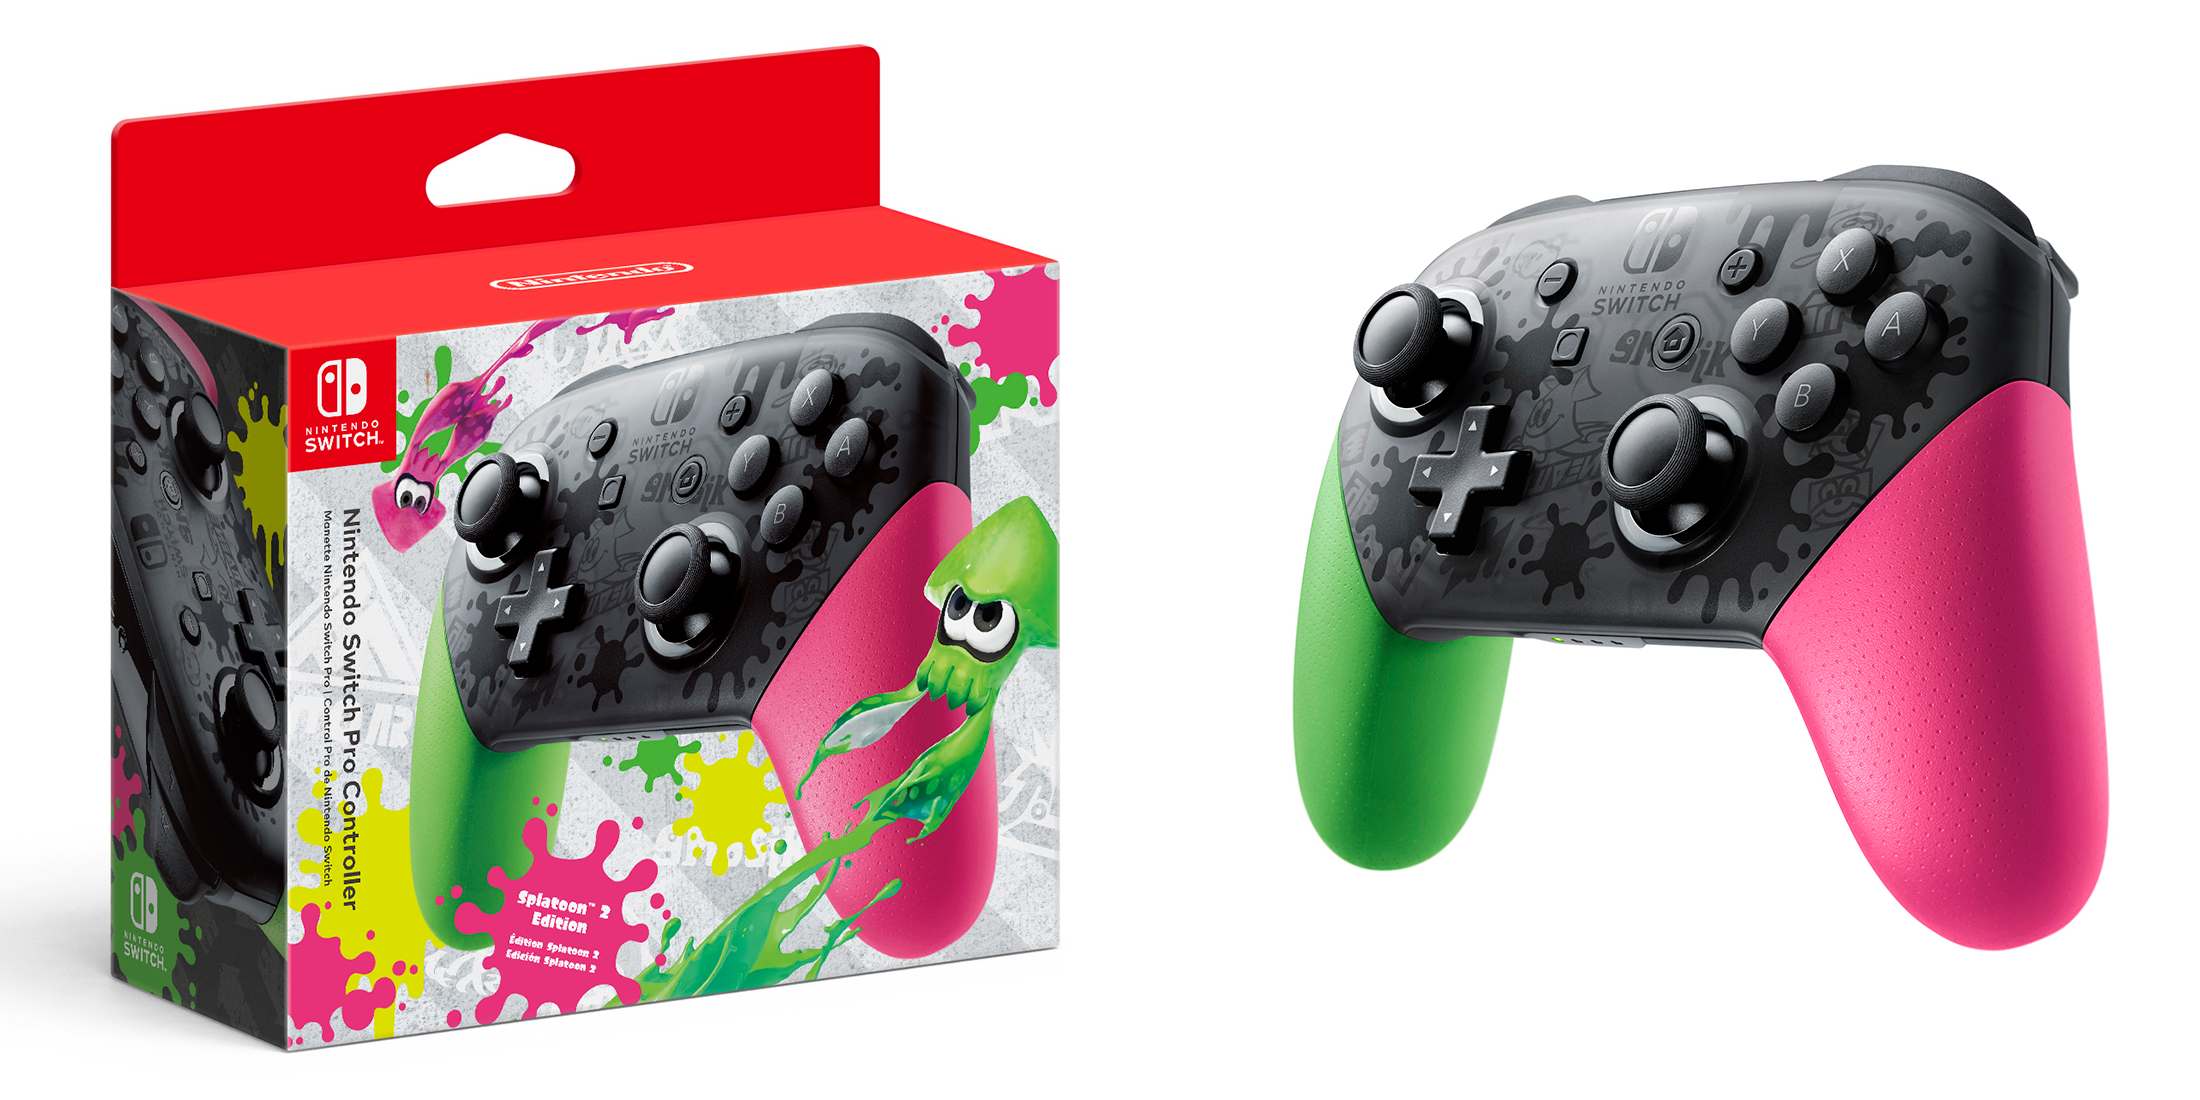 Splatoon 2 Nintendo Switch Pro Controller hits next month, pre-order now